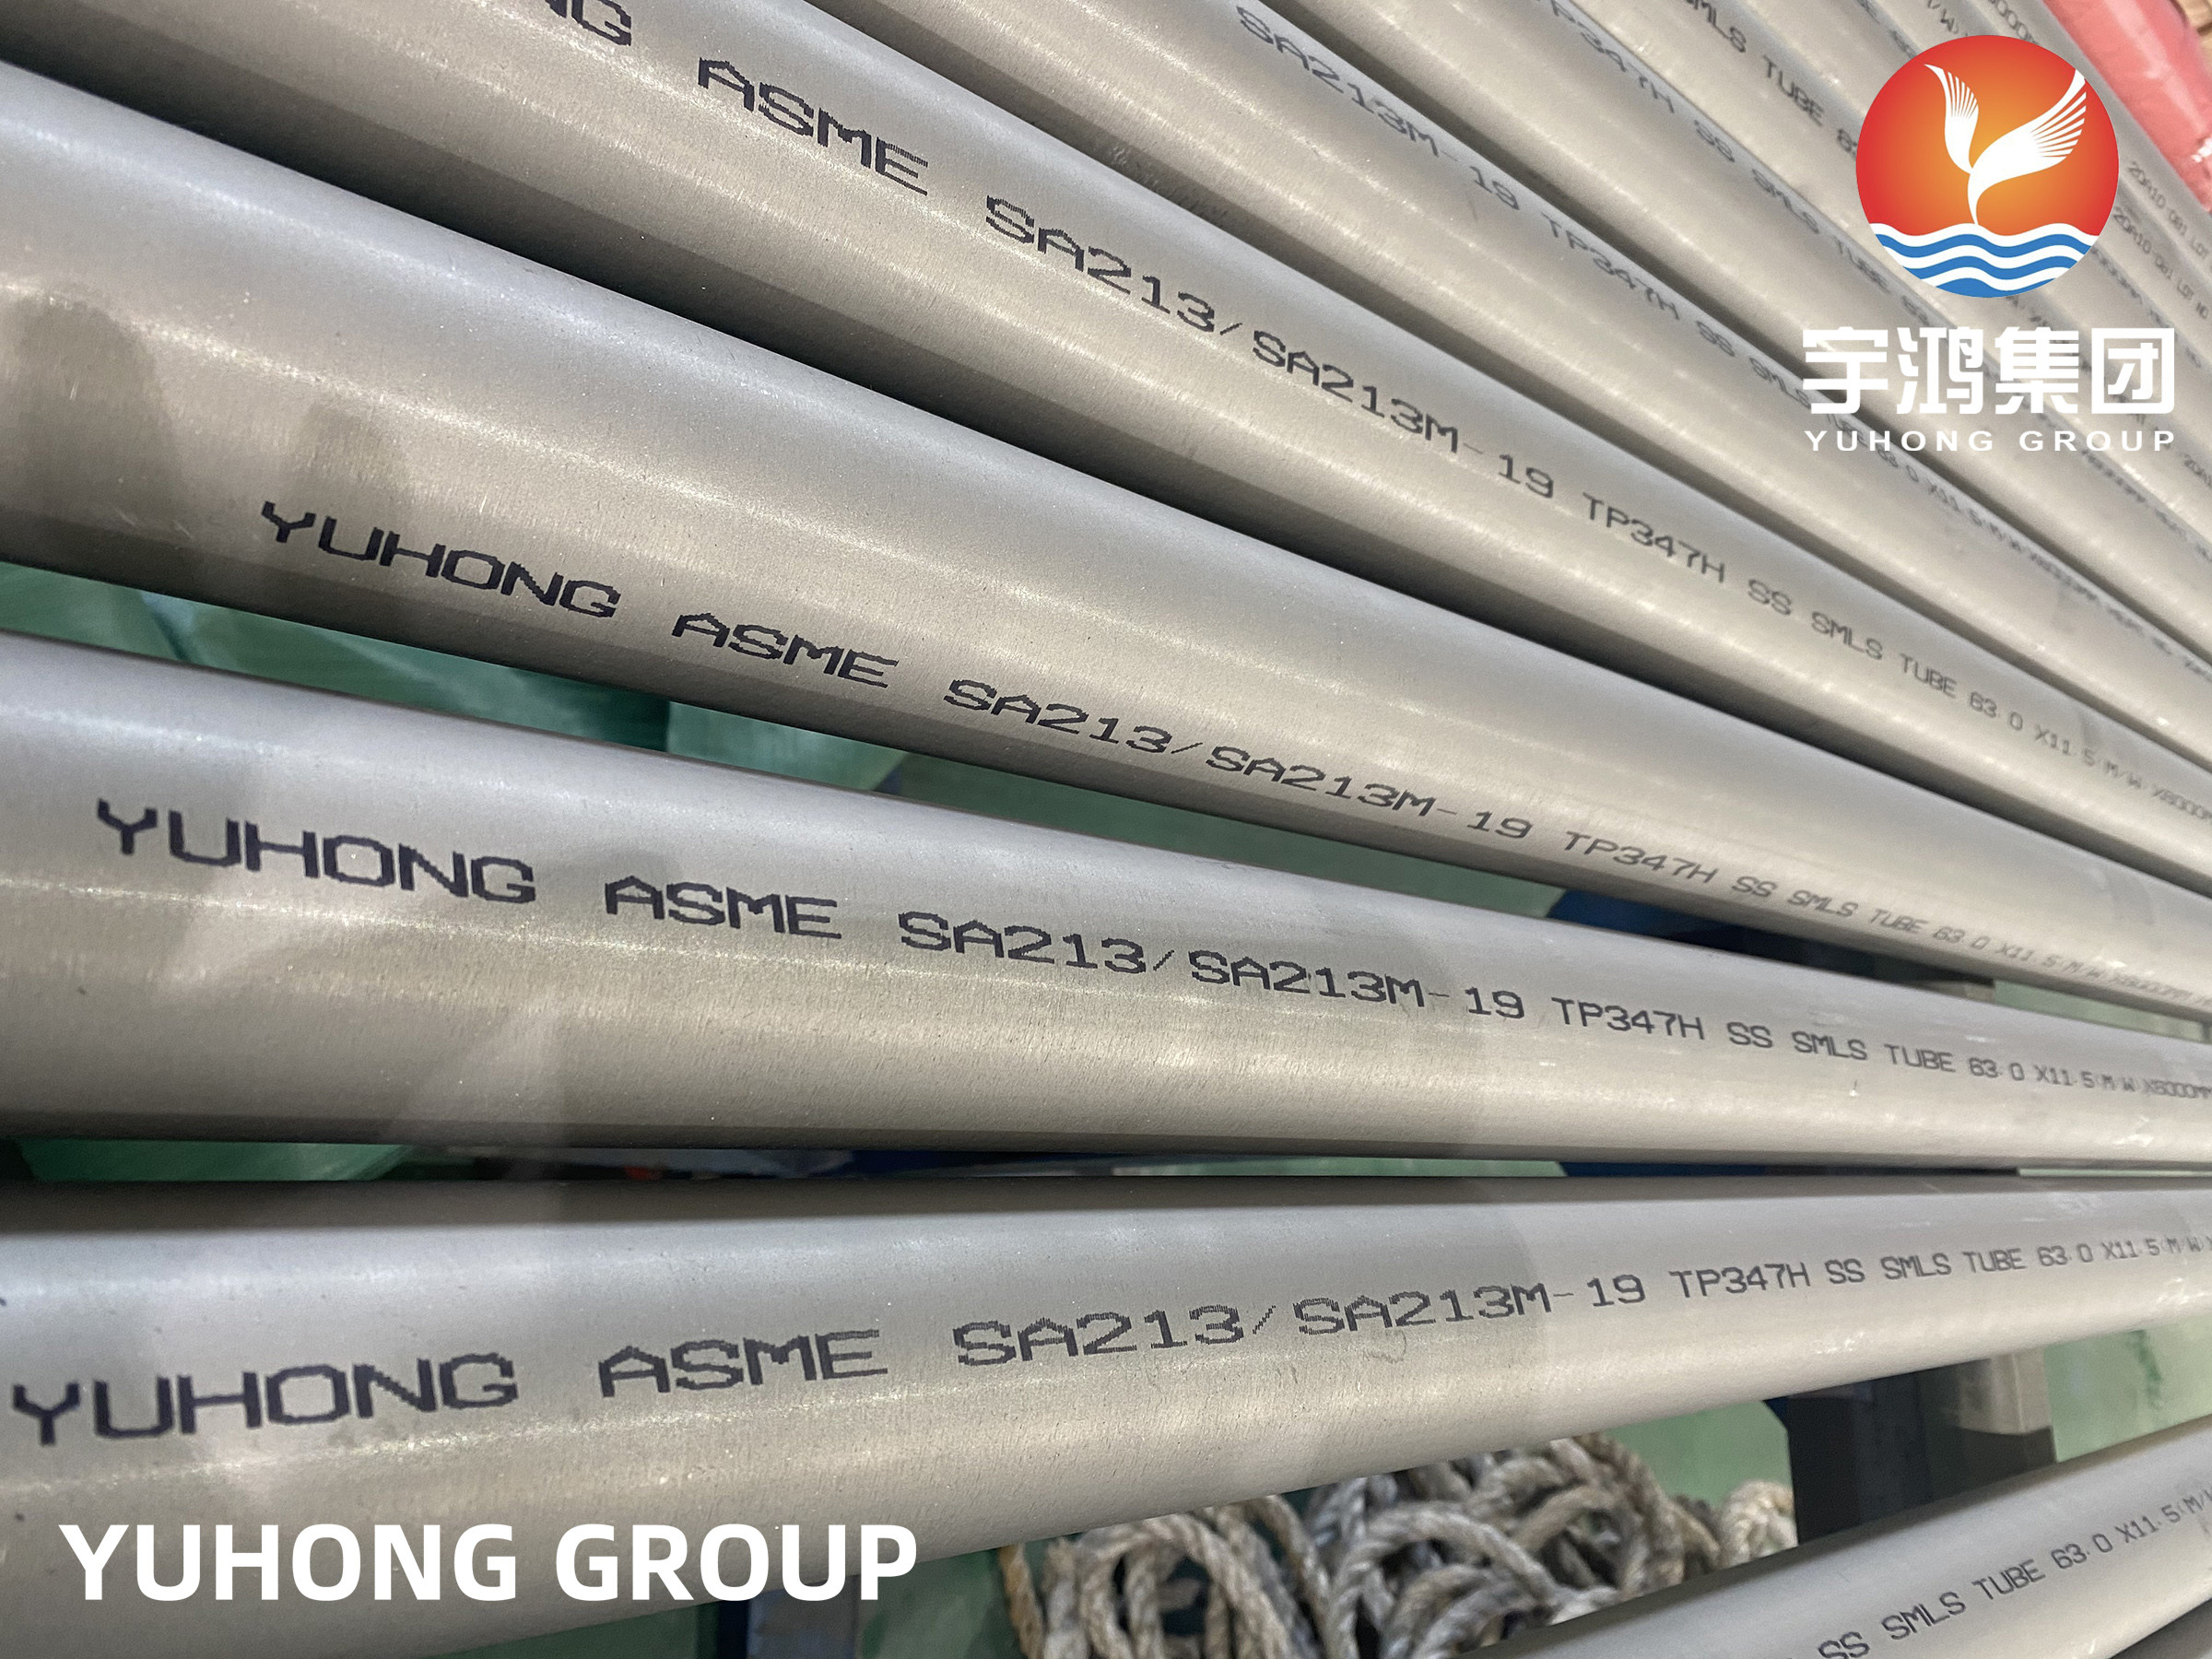 China ASTM A213/ASME SA213 M-21  TP347H Seamless Steel Tube for Boiler, Heat Exchanger tube wholesale